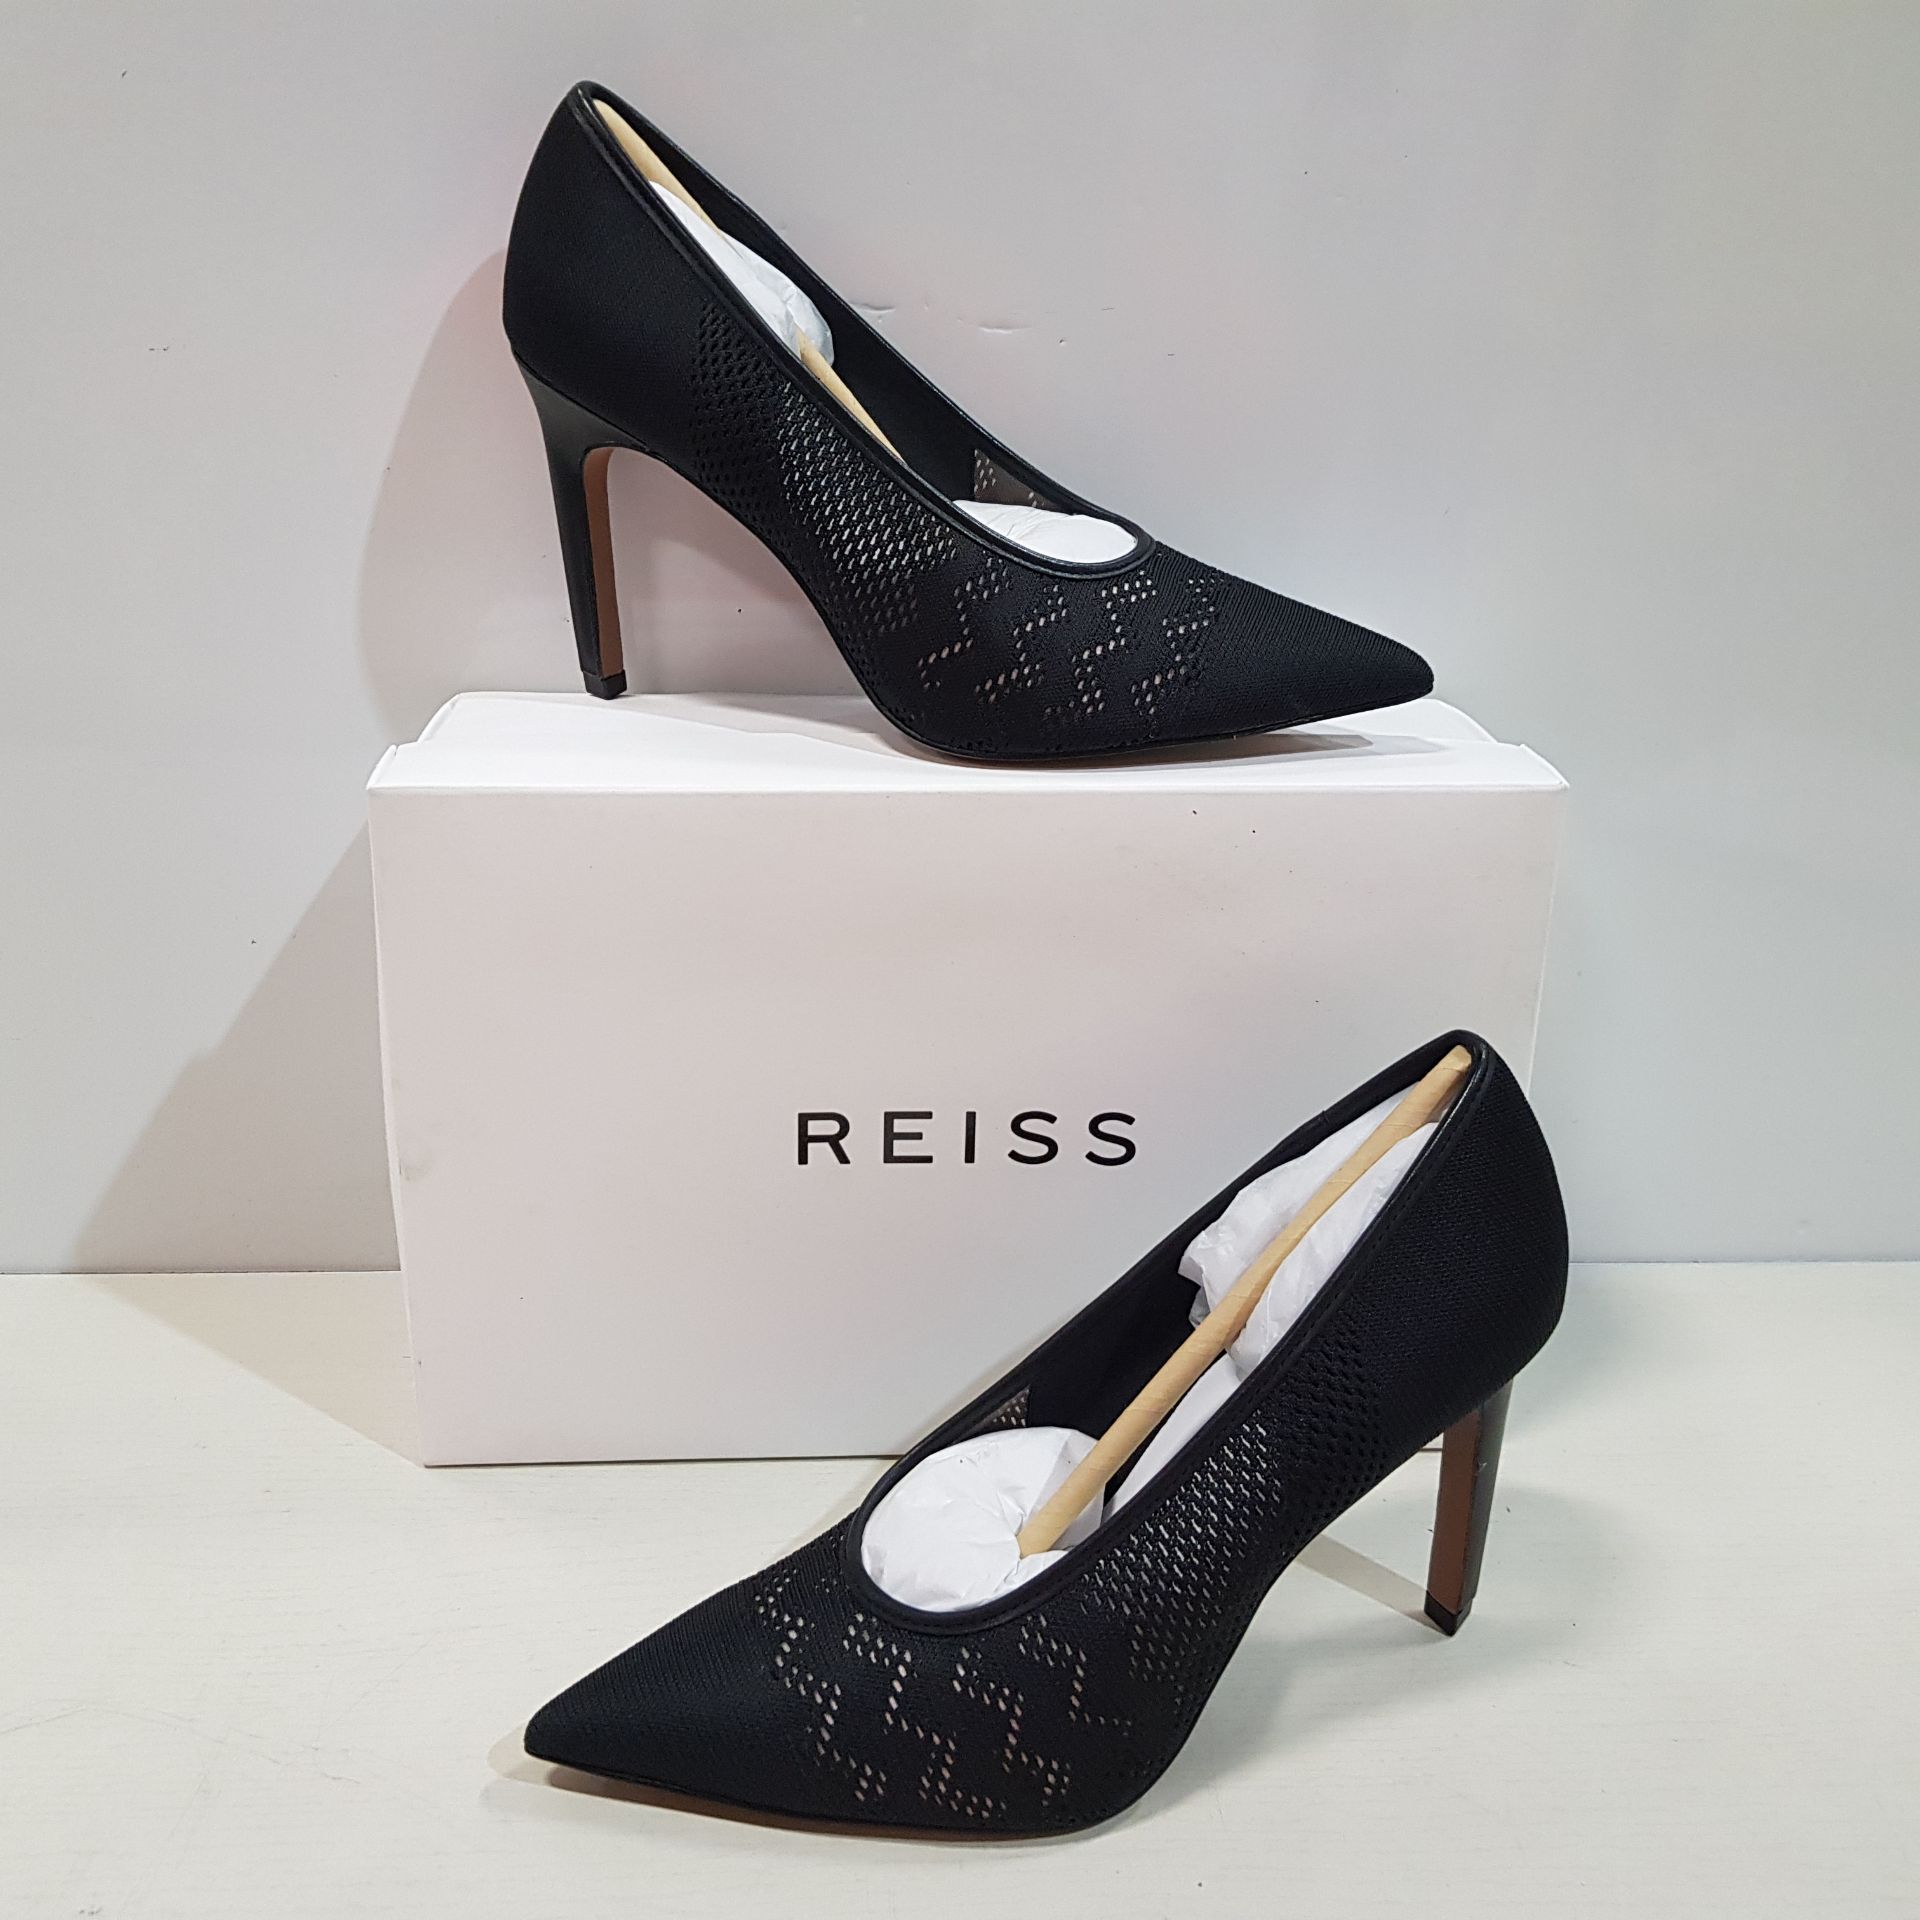 7 X BRAND NEW REISS ZENA COURT MESH/LACE SHOES IN BLACK - ALL IN SIZE UK 7